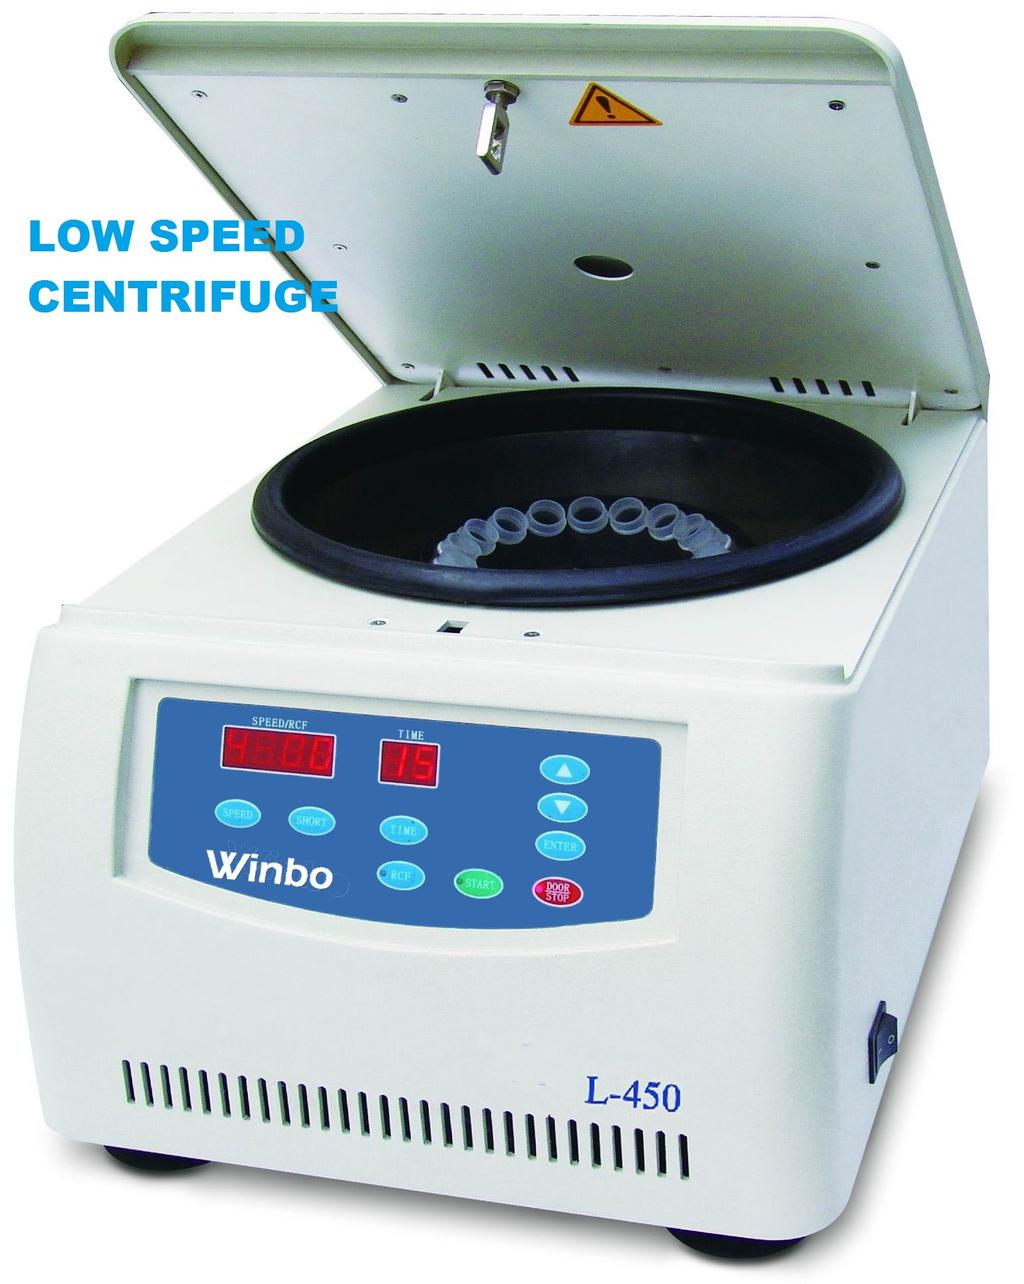 LOW SPEED CENTRIFUGE Most laboratories have a standard low-speed centrifuge used for routine sedimentation of heavy particles. The low speed centrifuge has a maximum speed of 4000-5000rpm.